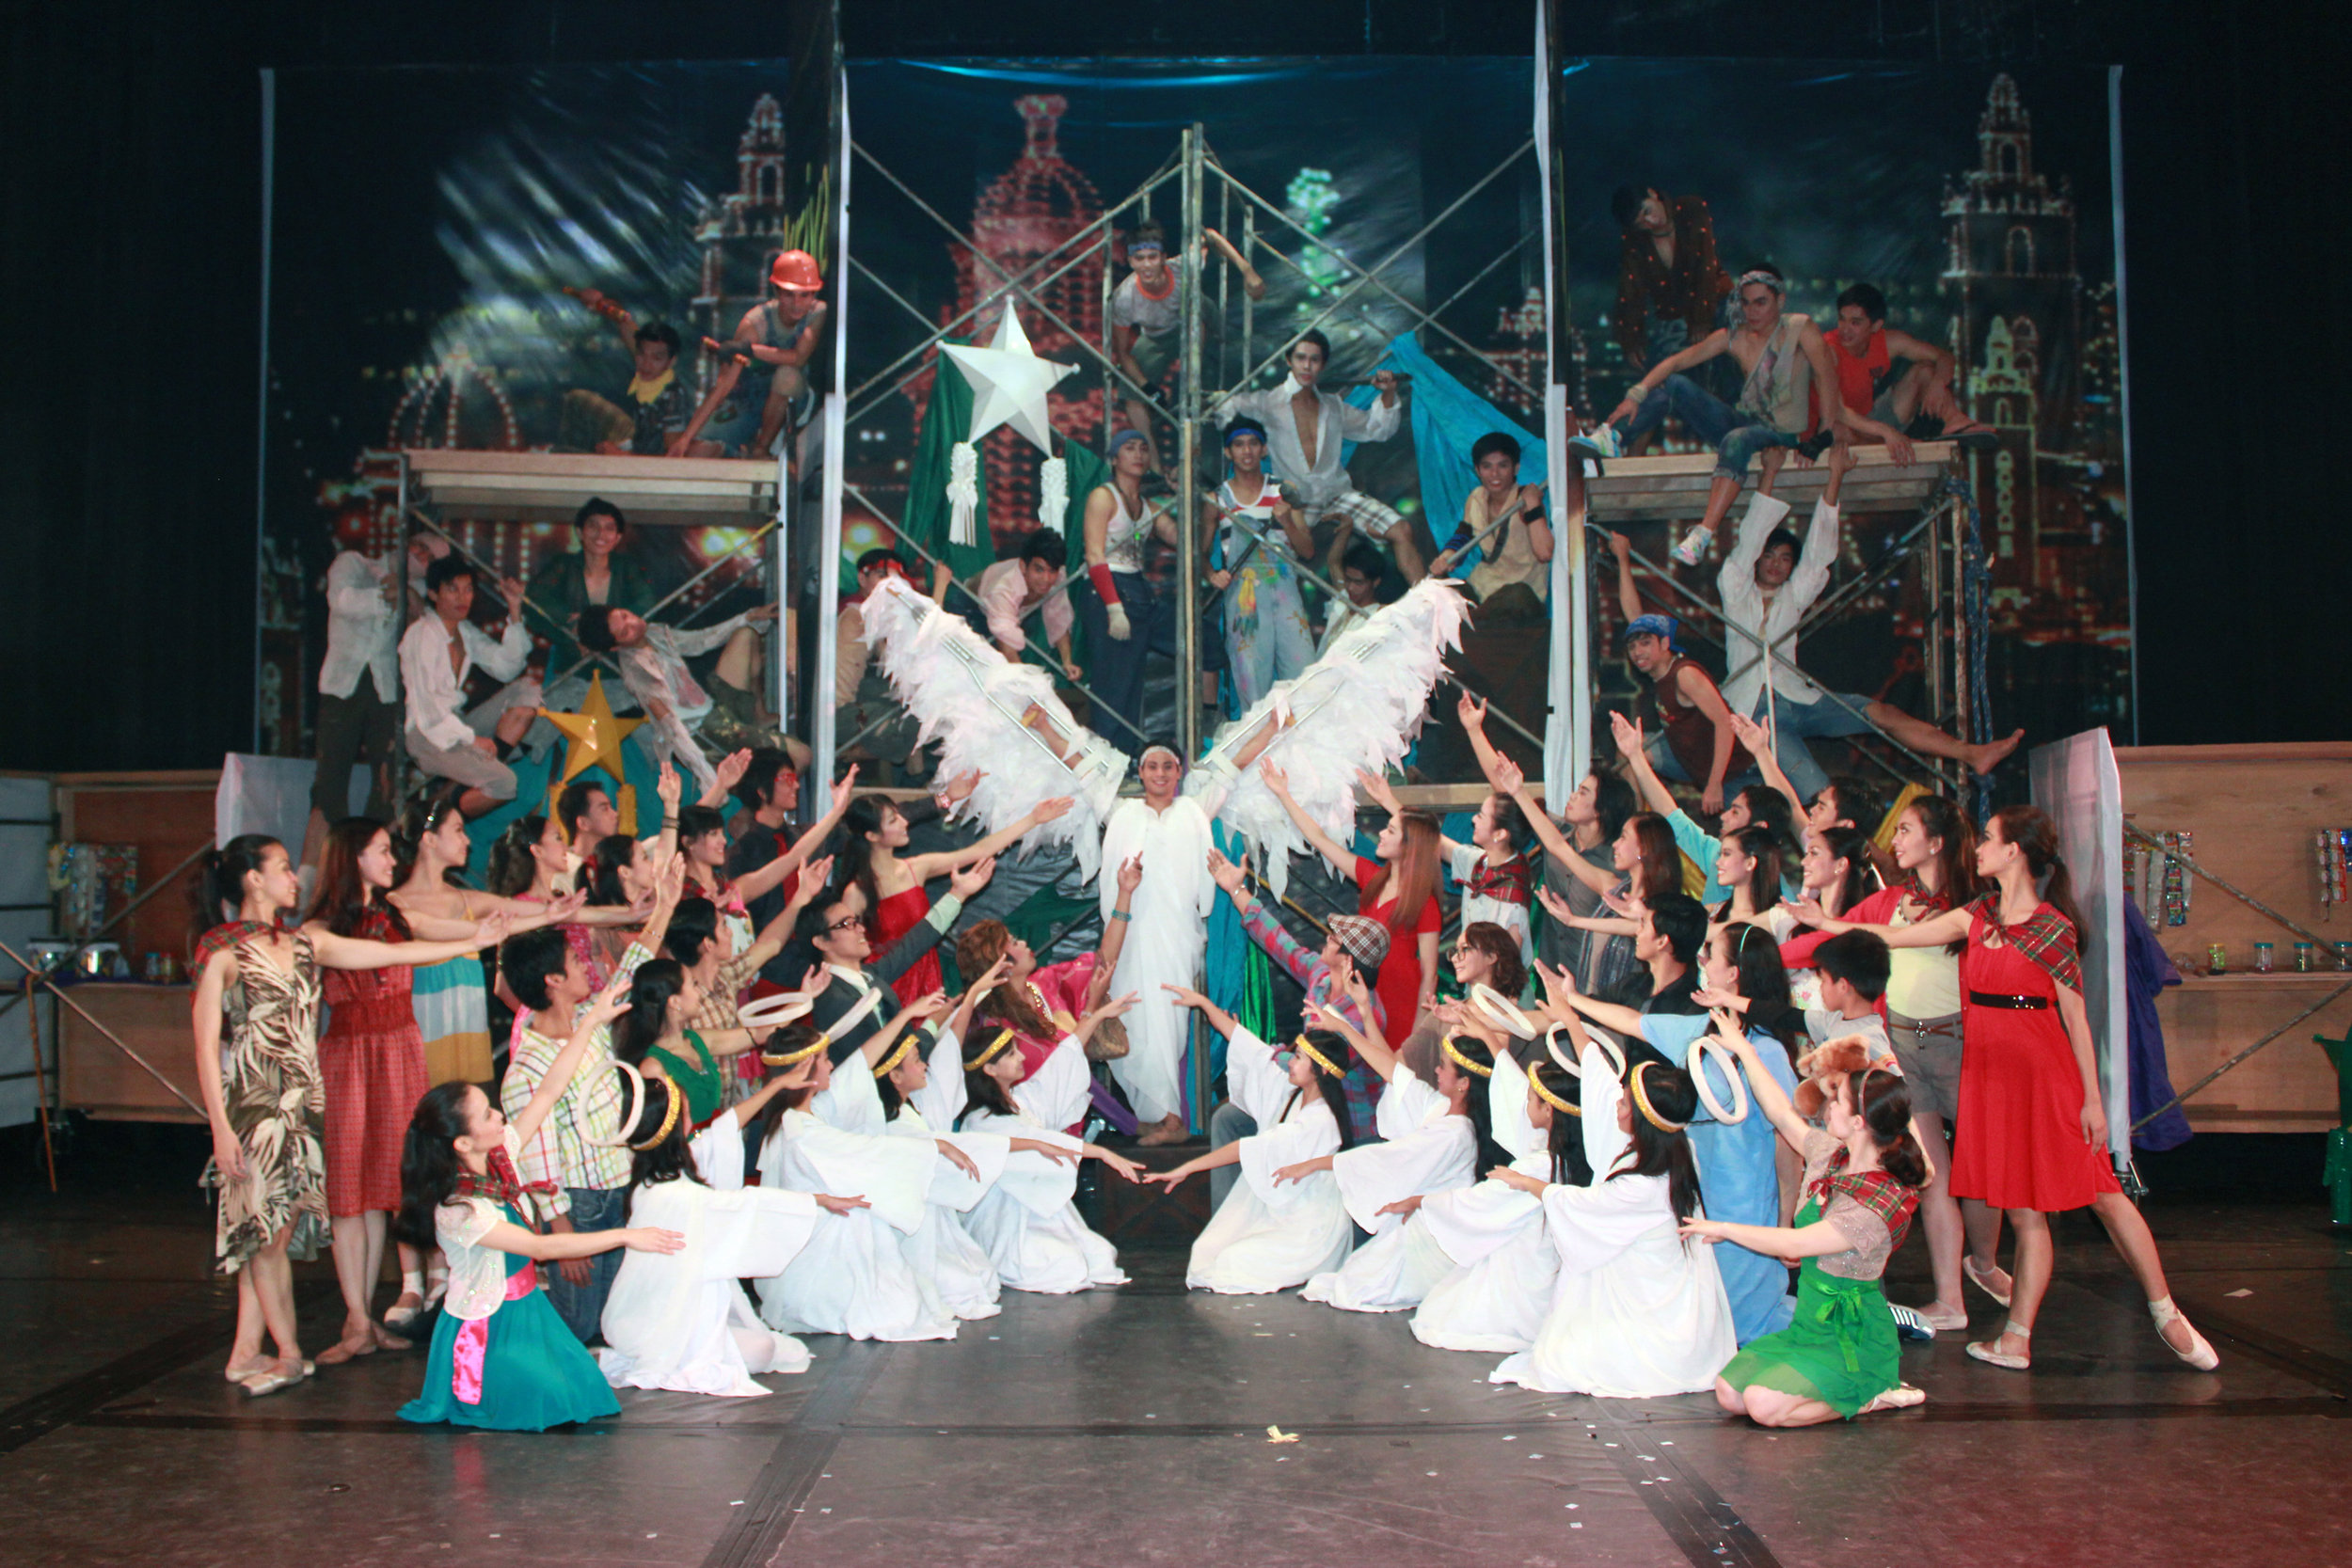   Kutitap , about an angel who falls to earth and befriends different people, was Ballet Manila’s Christmas production at Star City in 2016. 